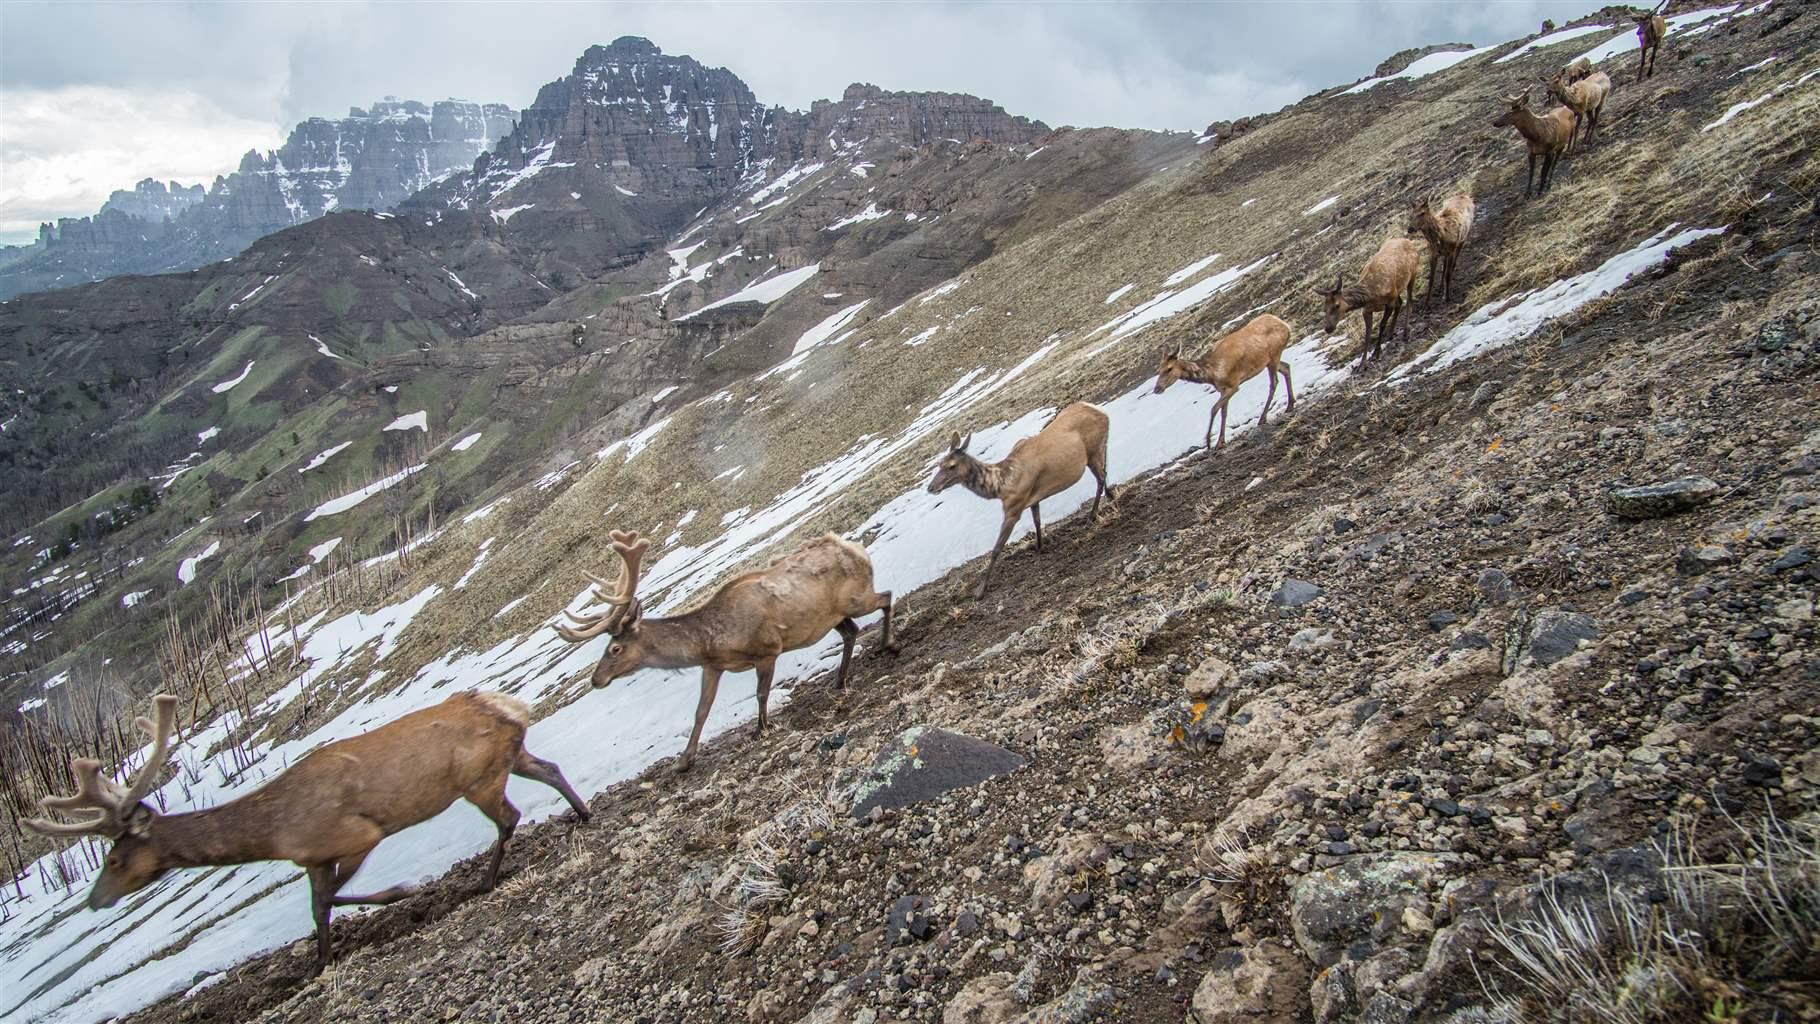 Nine elk descend a scree-covered high-altitude slope in single file with light snow on the ground and mountains in the distance.